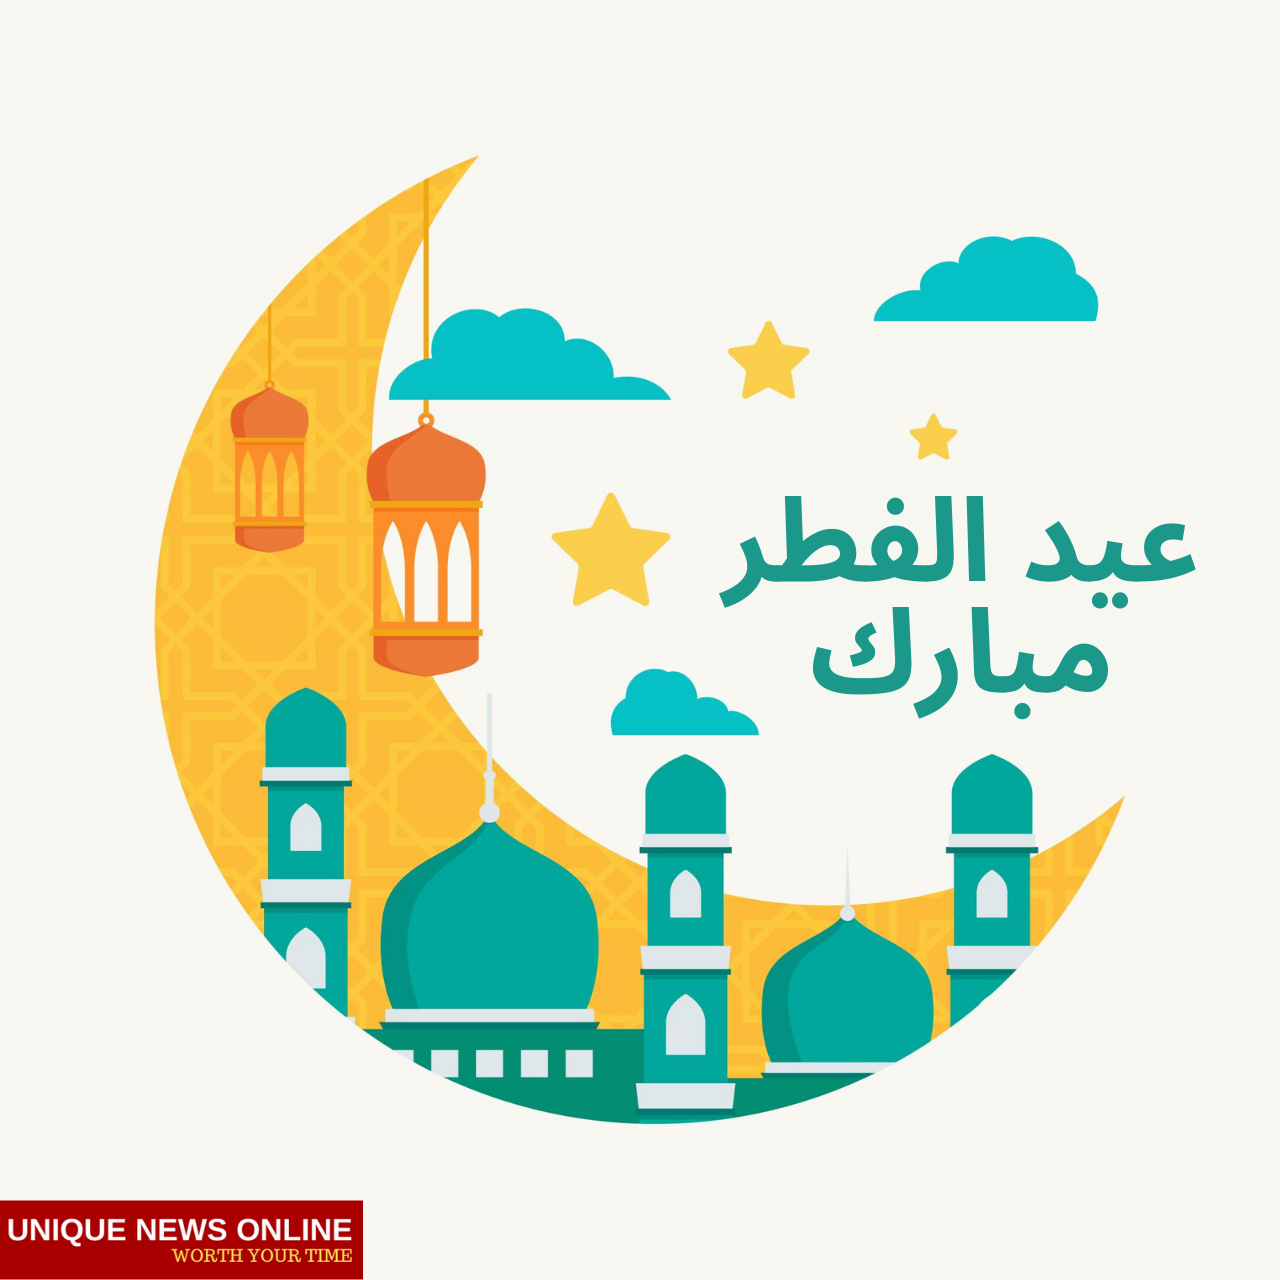 Eid al-Fitr Mubarak 2021 Wishes in Arabic, Images, Greetings, Quotes, and Messages to share on this Eid-ul-Fitr